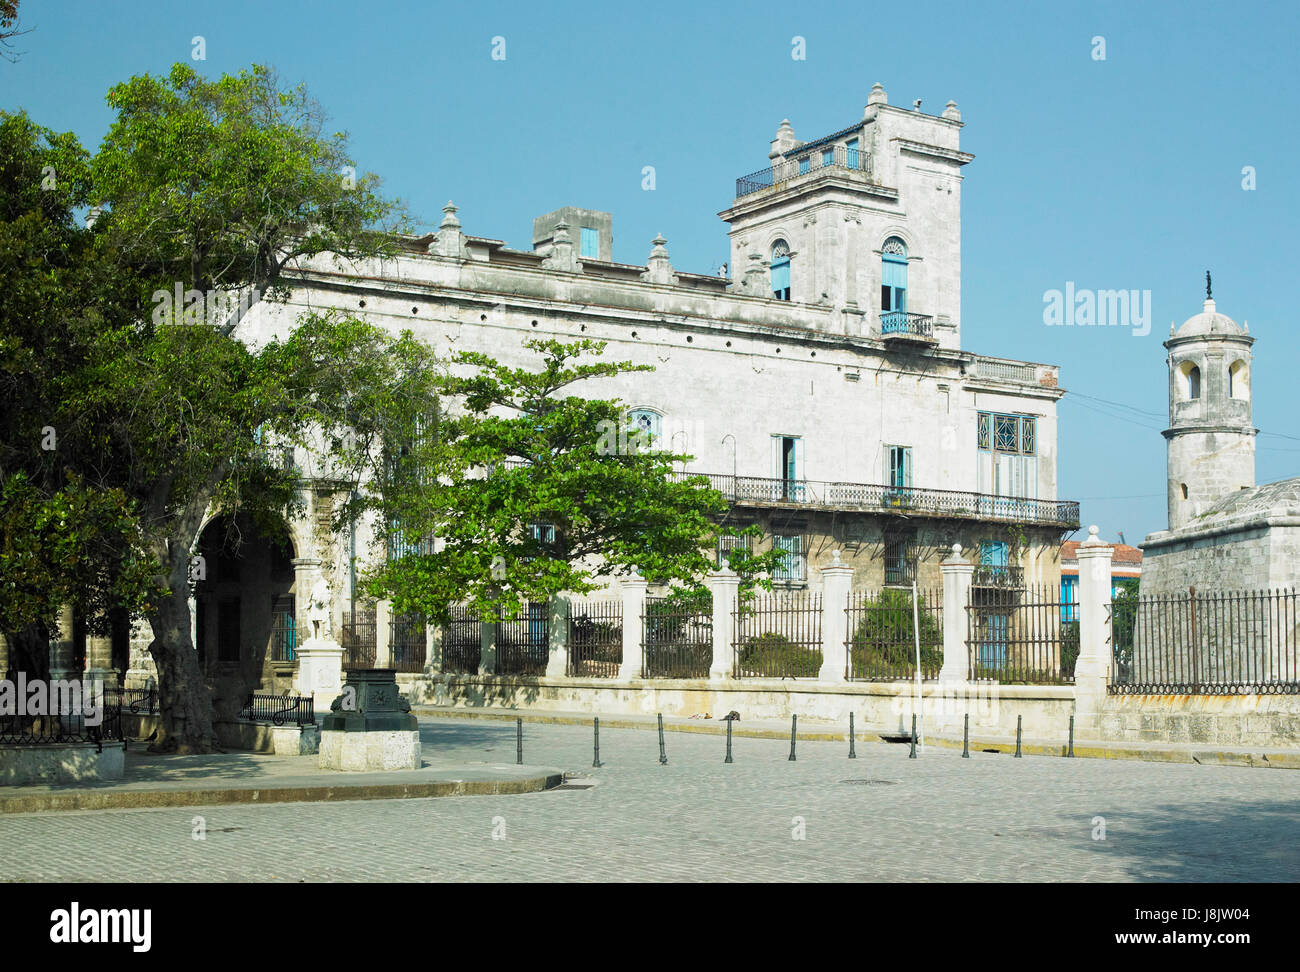 style of construction, architecture, architectural style, travel, historical, Stock Photo